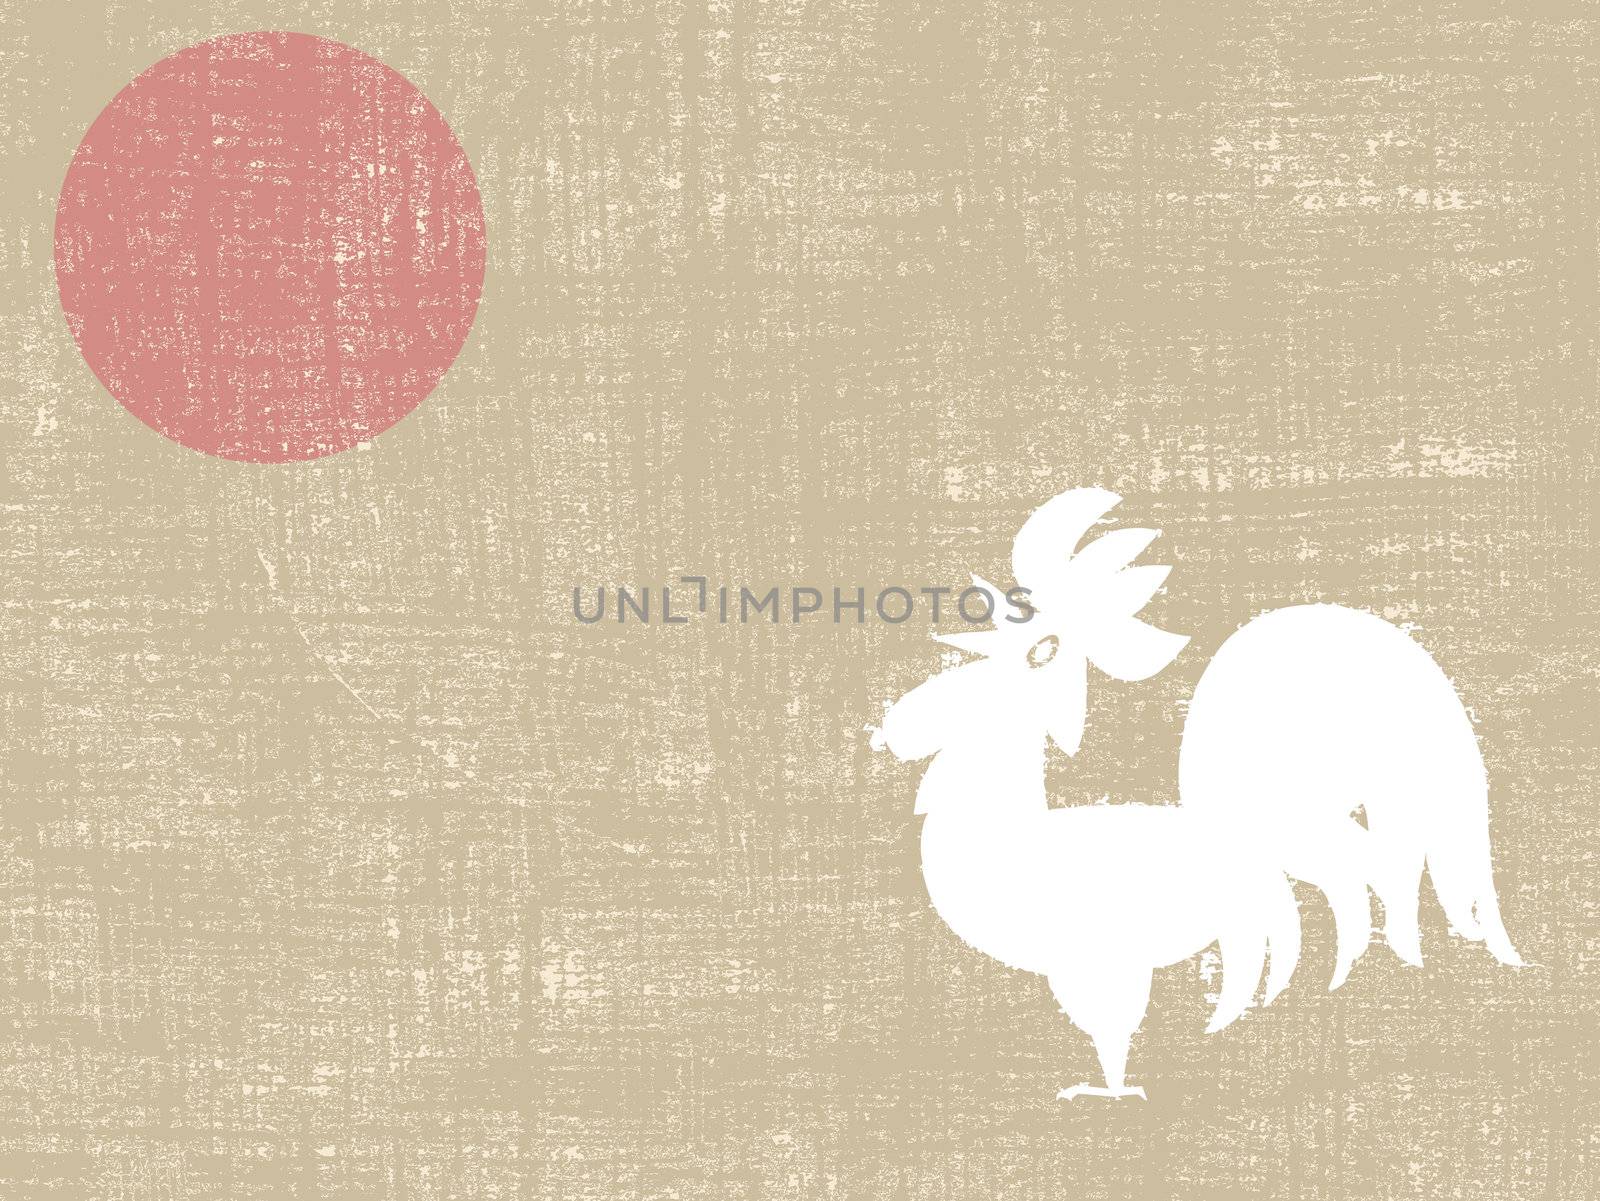 cock silhouette on grunge background